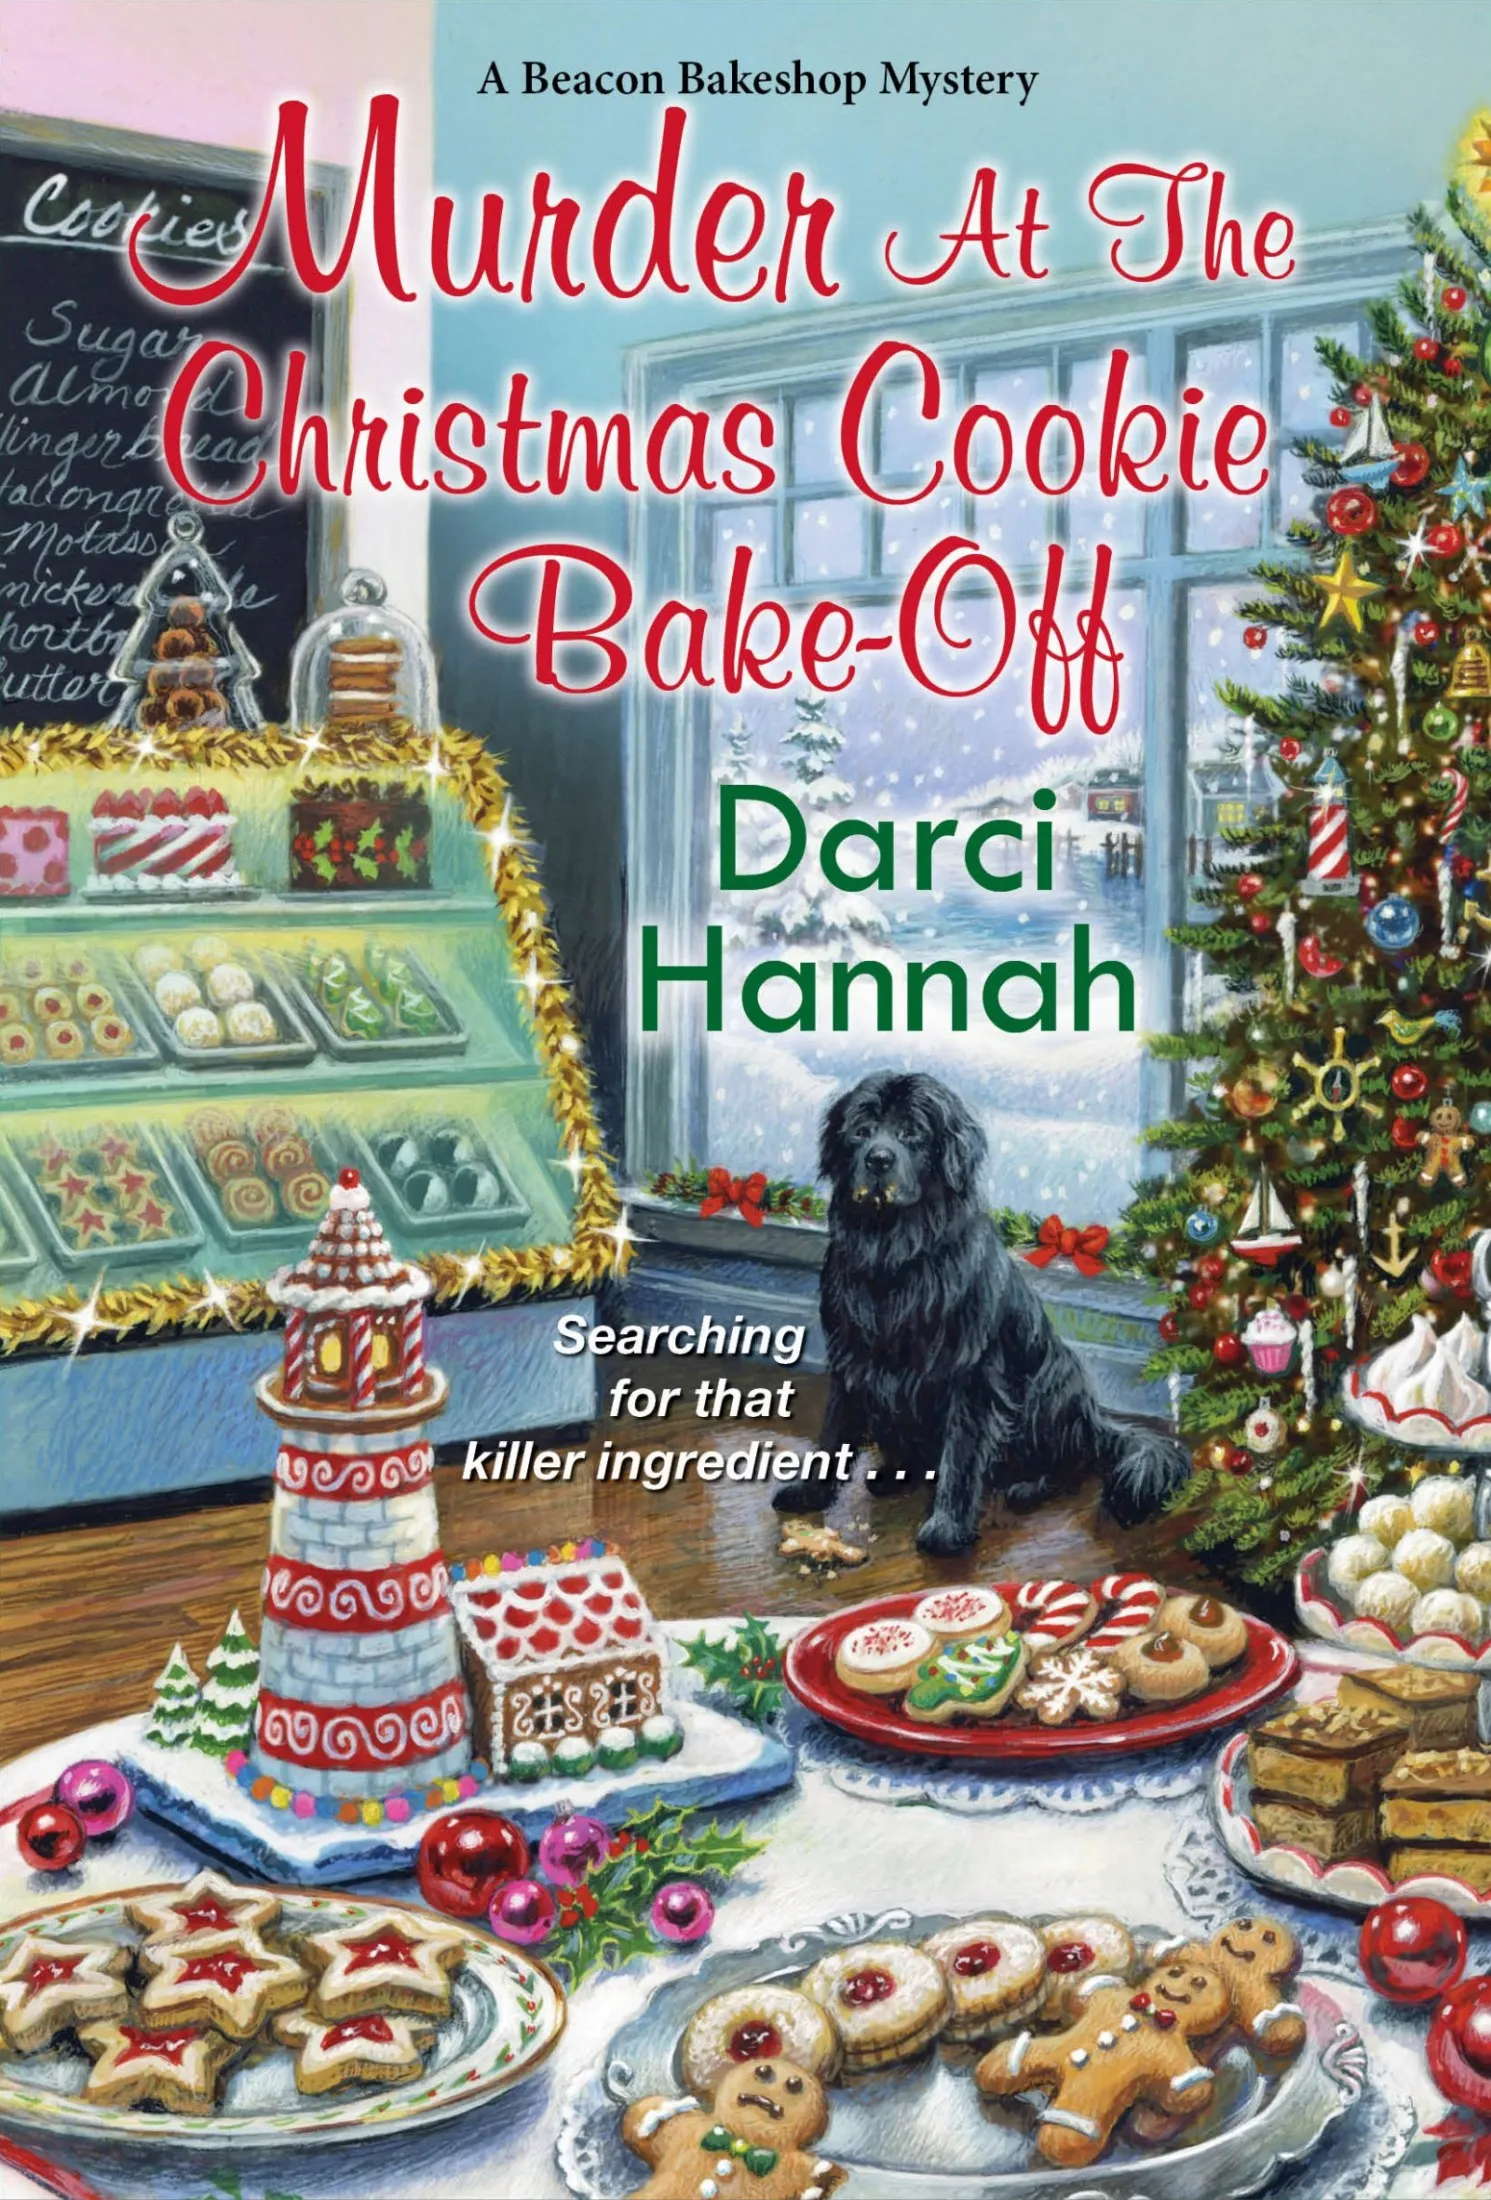 Murder at the Christmas Cookie Bake-Off (A Beacon Bakeshop Mystery #2)